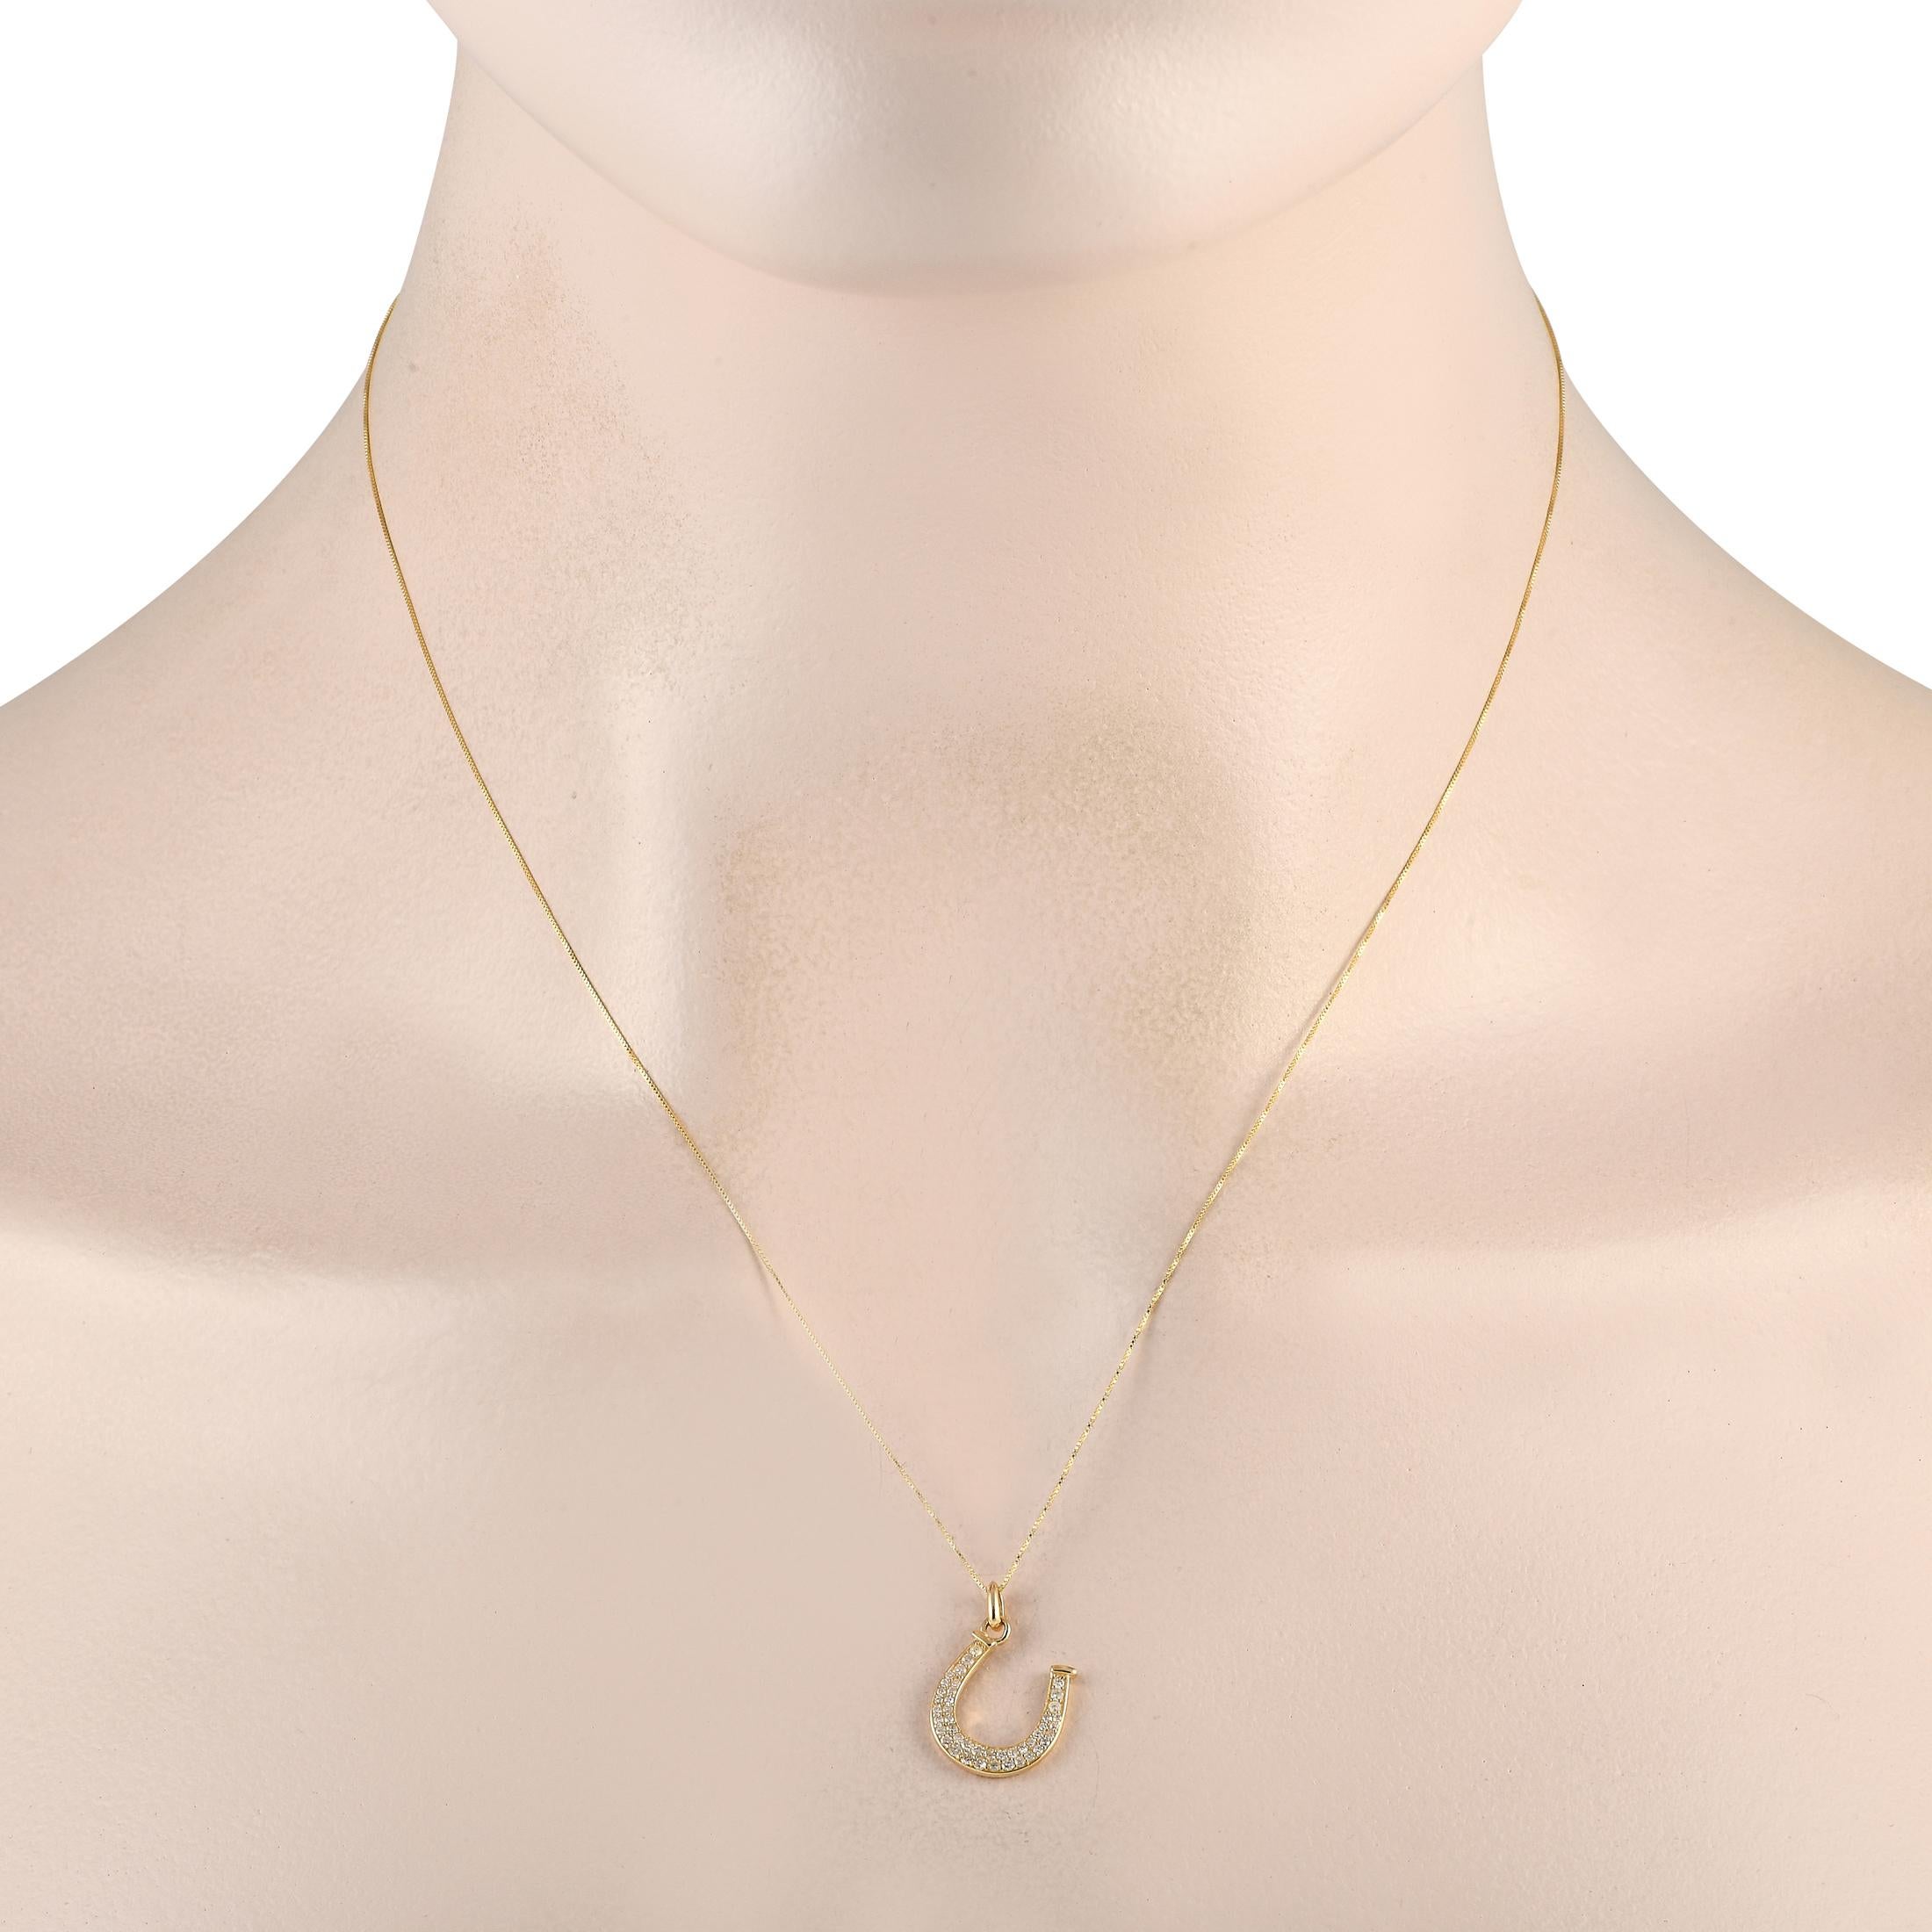 This luxury necklace is poised to continually bring you good luck. Suspended from an 18 chain, youll find a horseshoe shaped pendant measuring 0.75 long by 0.50 wide. This elegant accessory is crafted from 14K Yellow Gold and features inset Diamonds